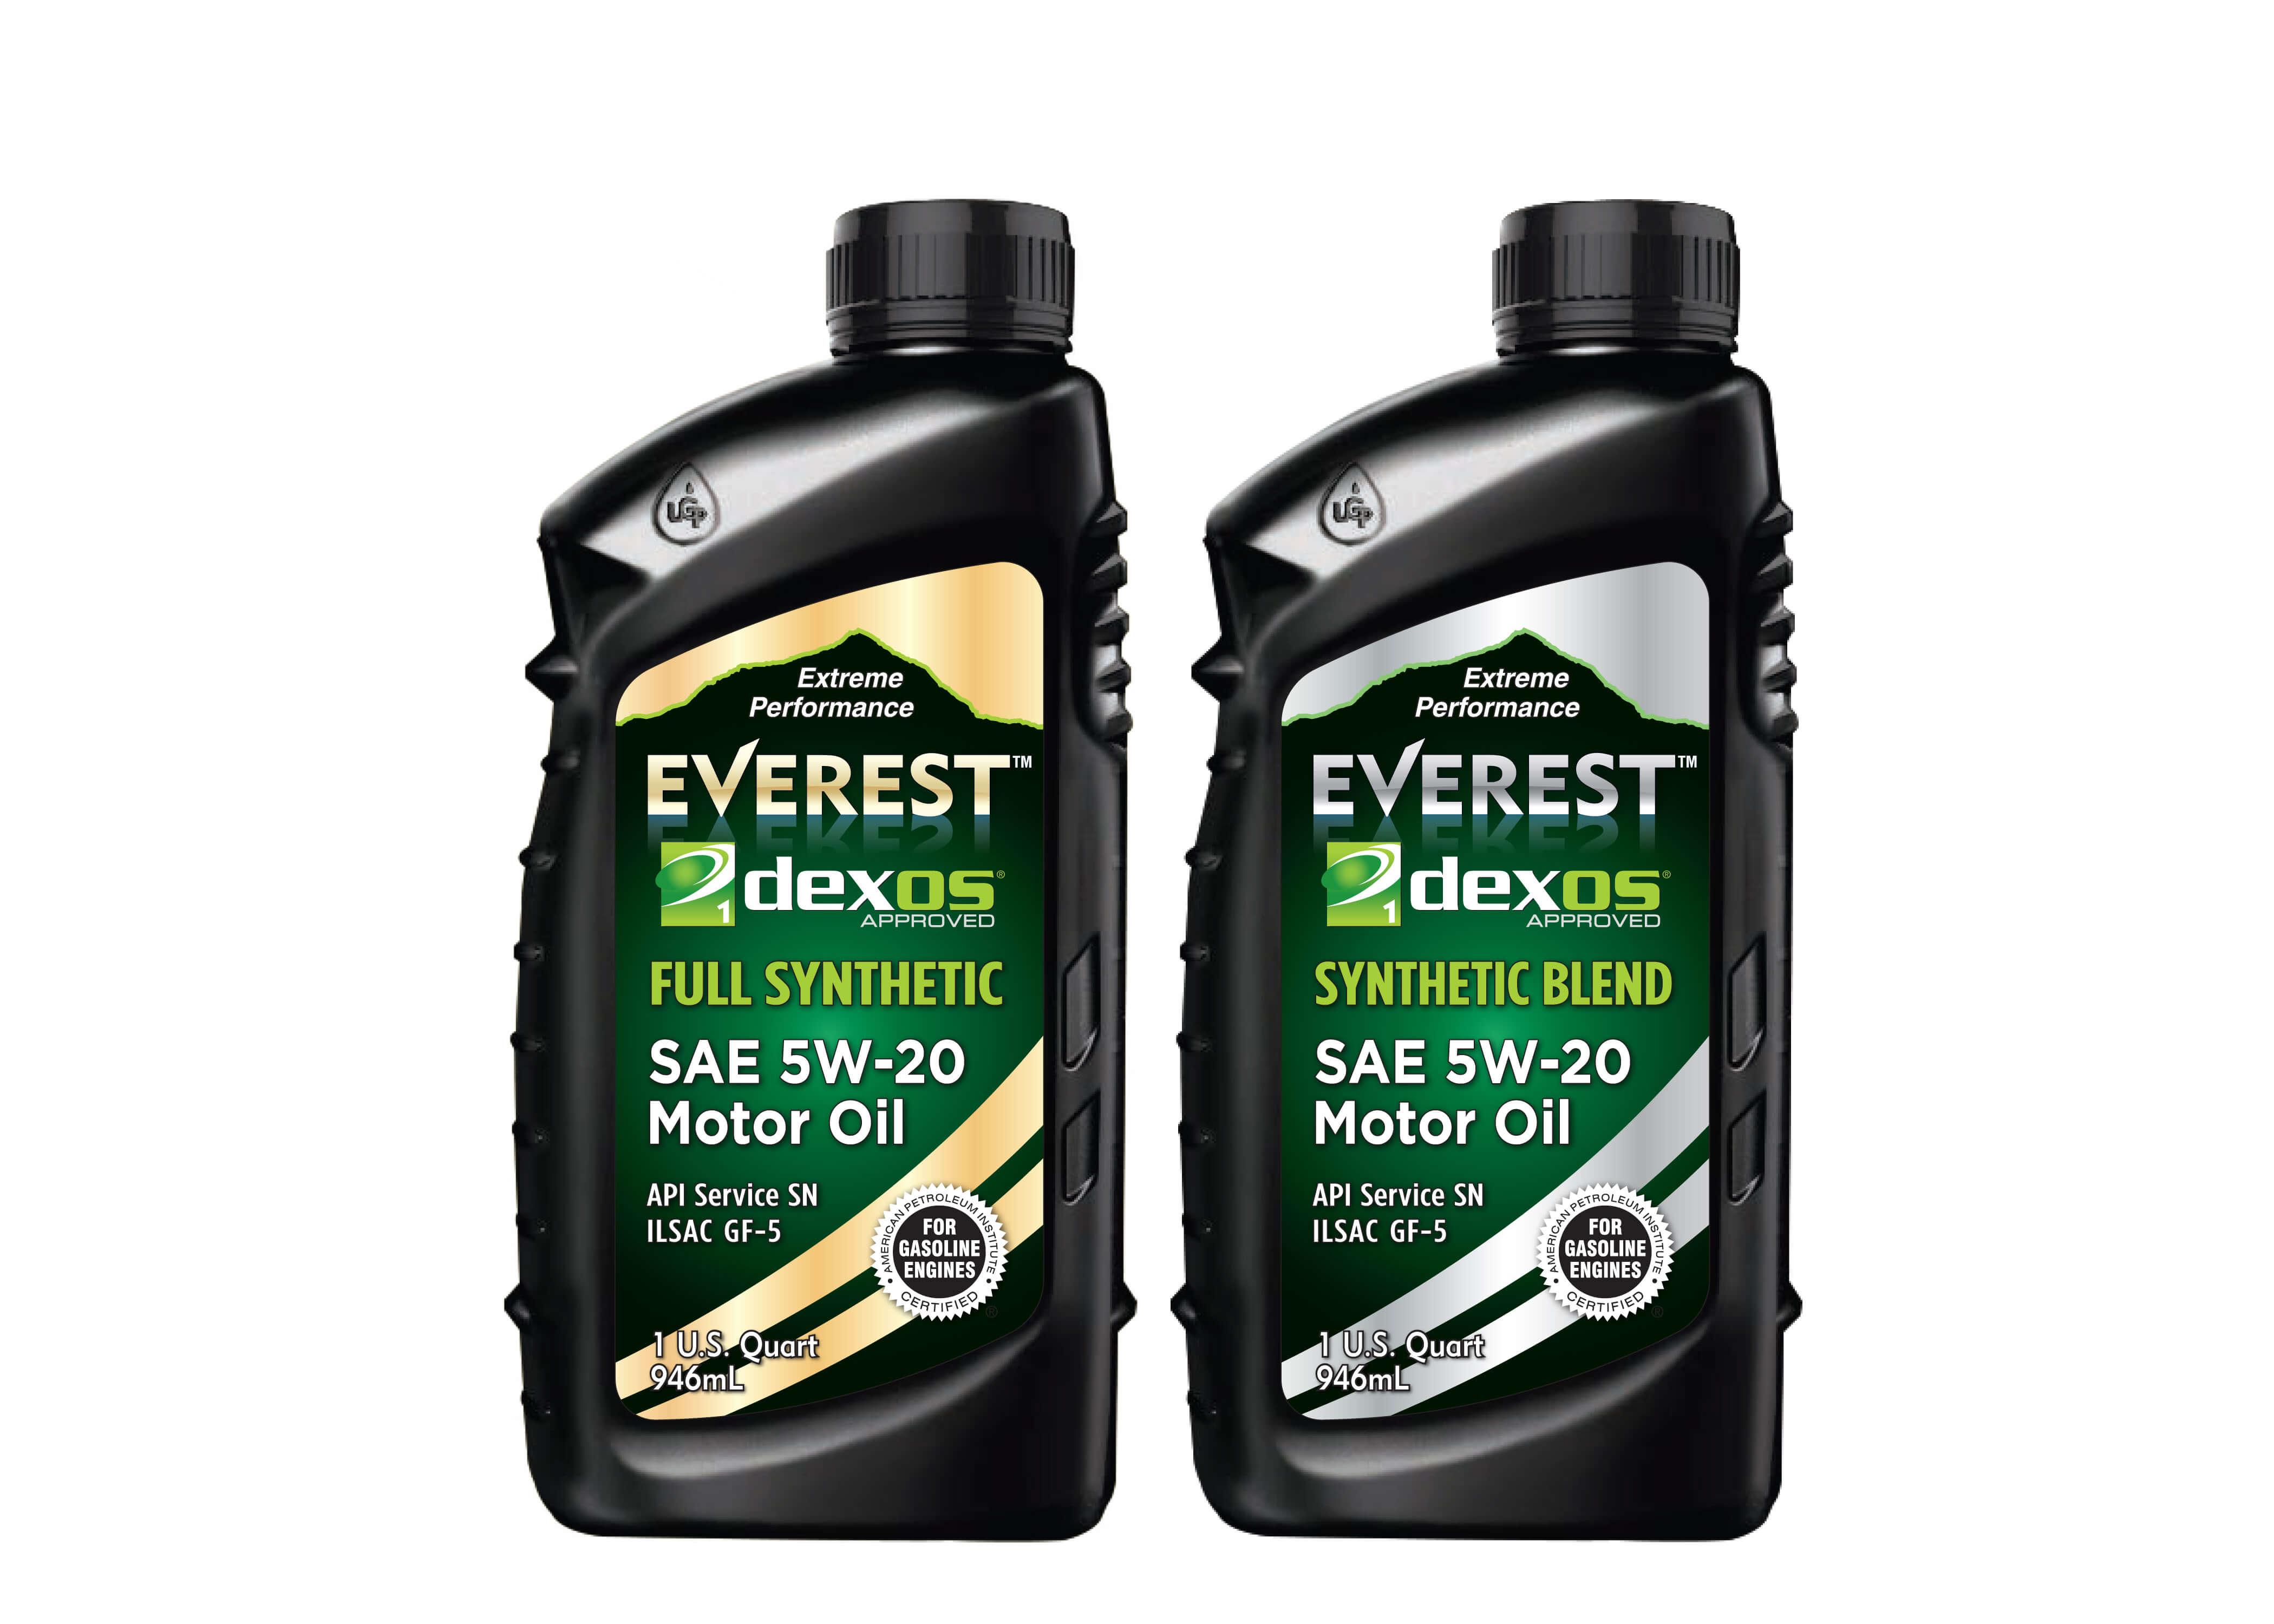 Everest and Golden Stallion motor oil is now DEXOS1 approved!